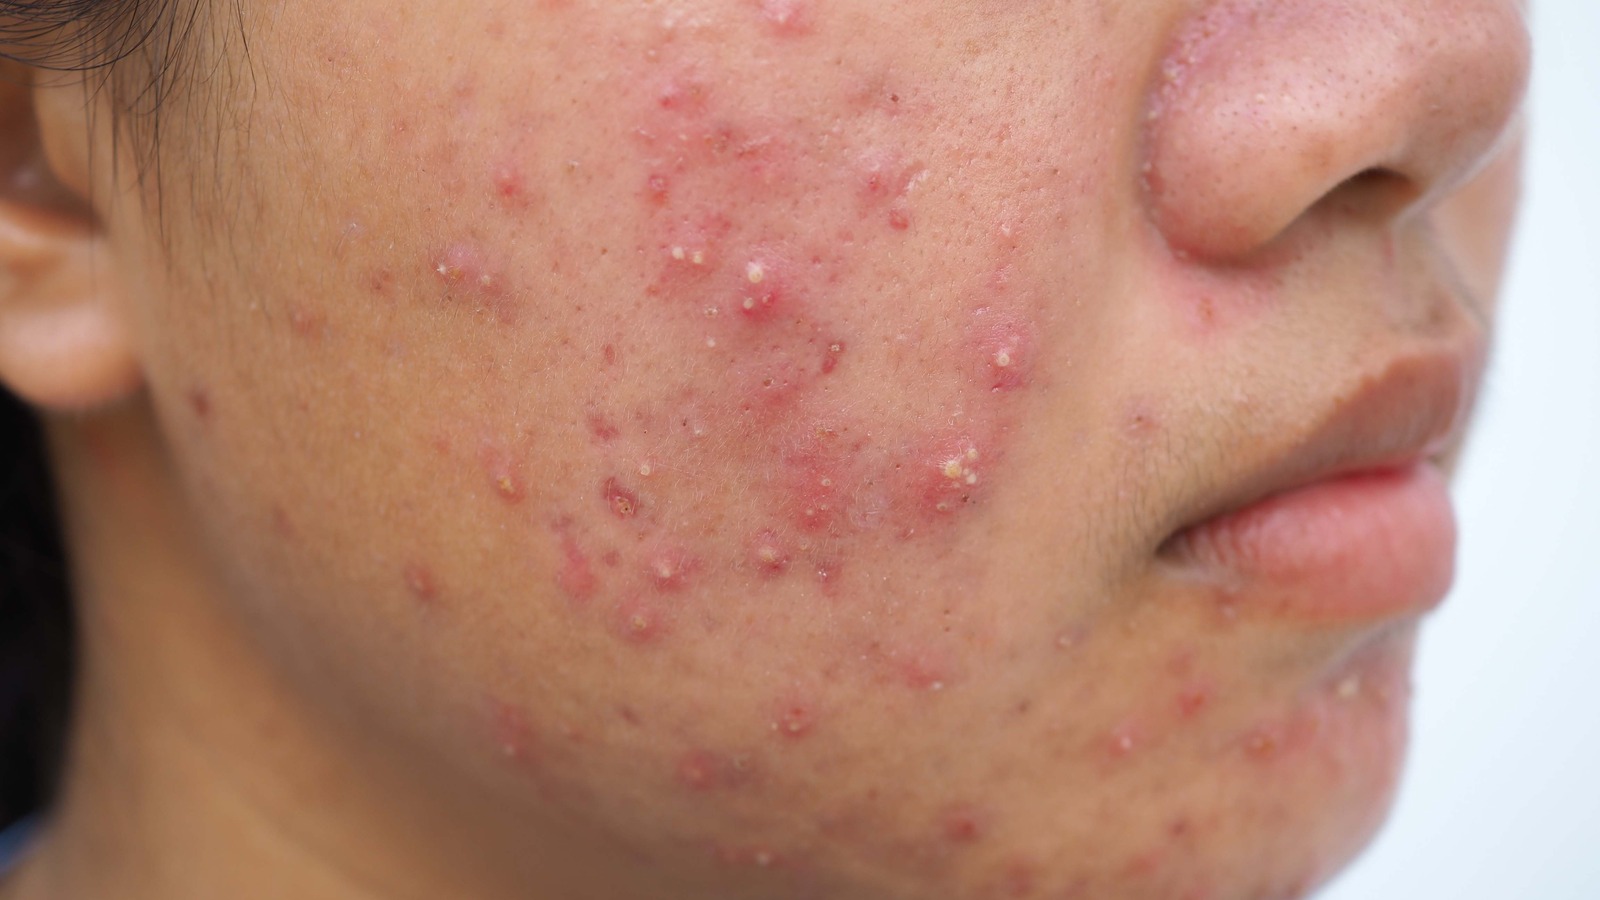 Cystic Acne: What Causes It? Symptoms And Treatments